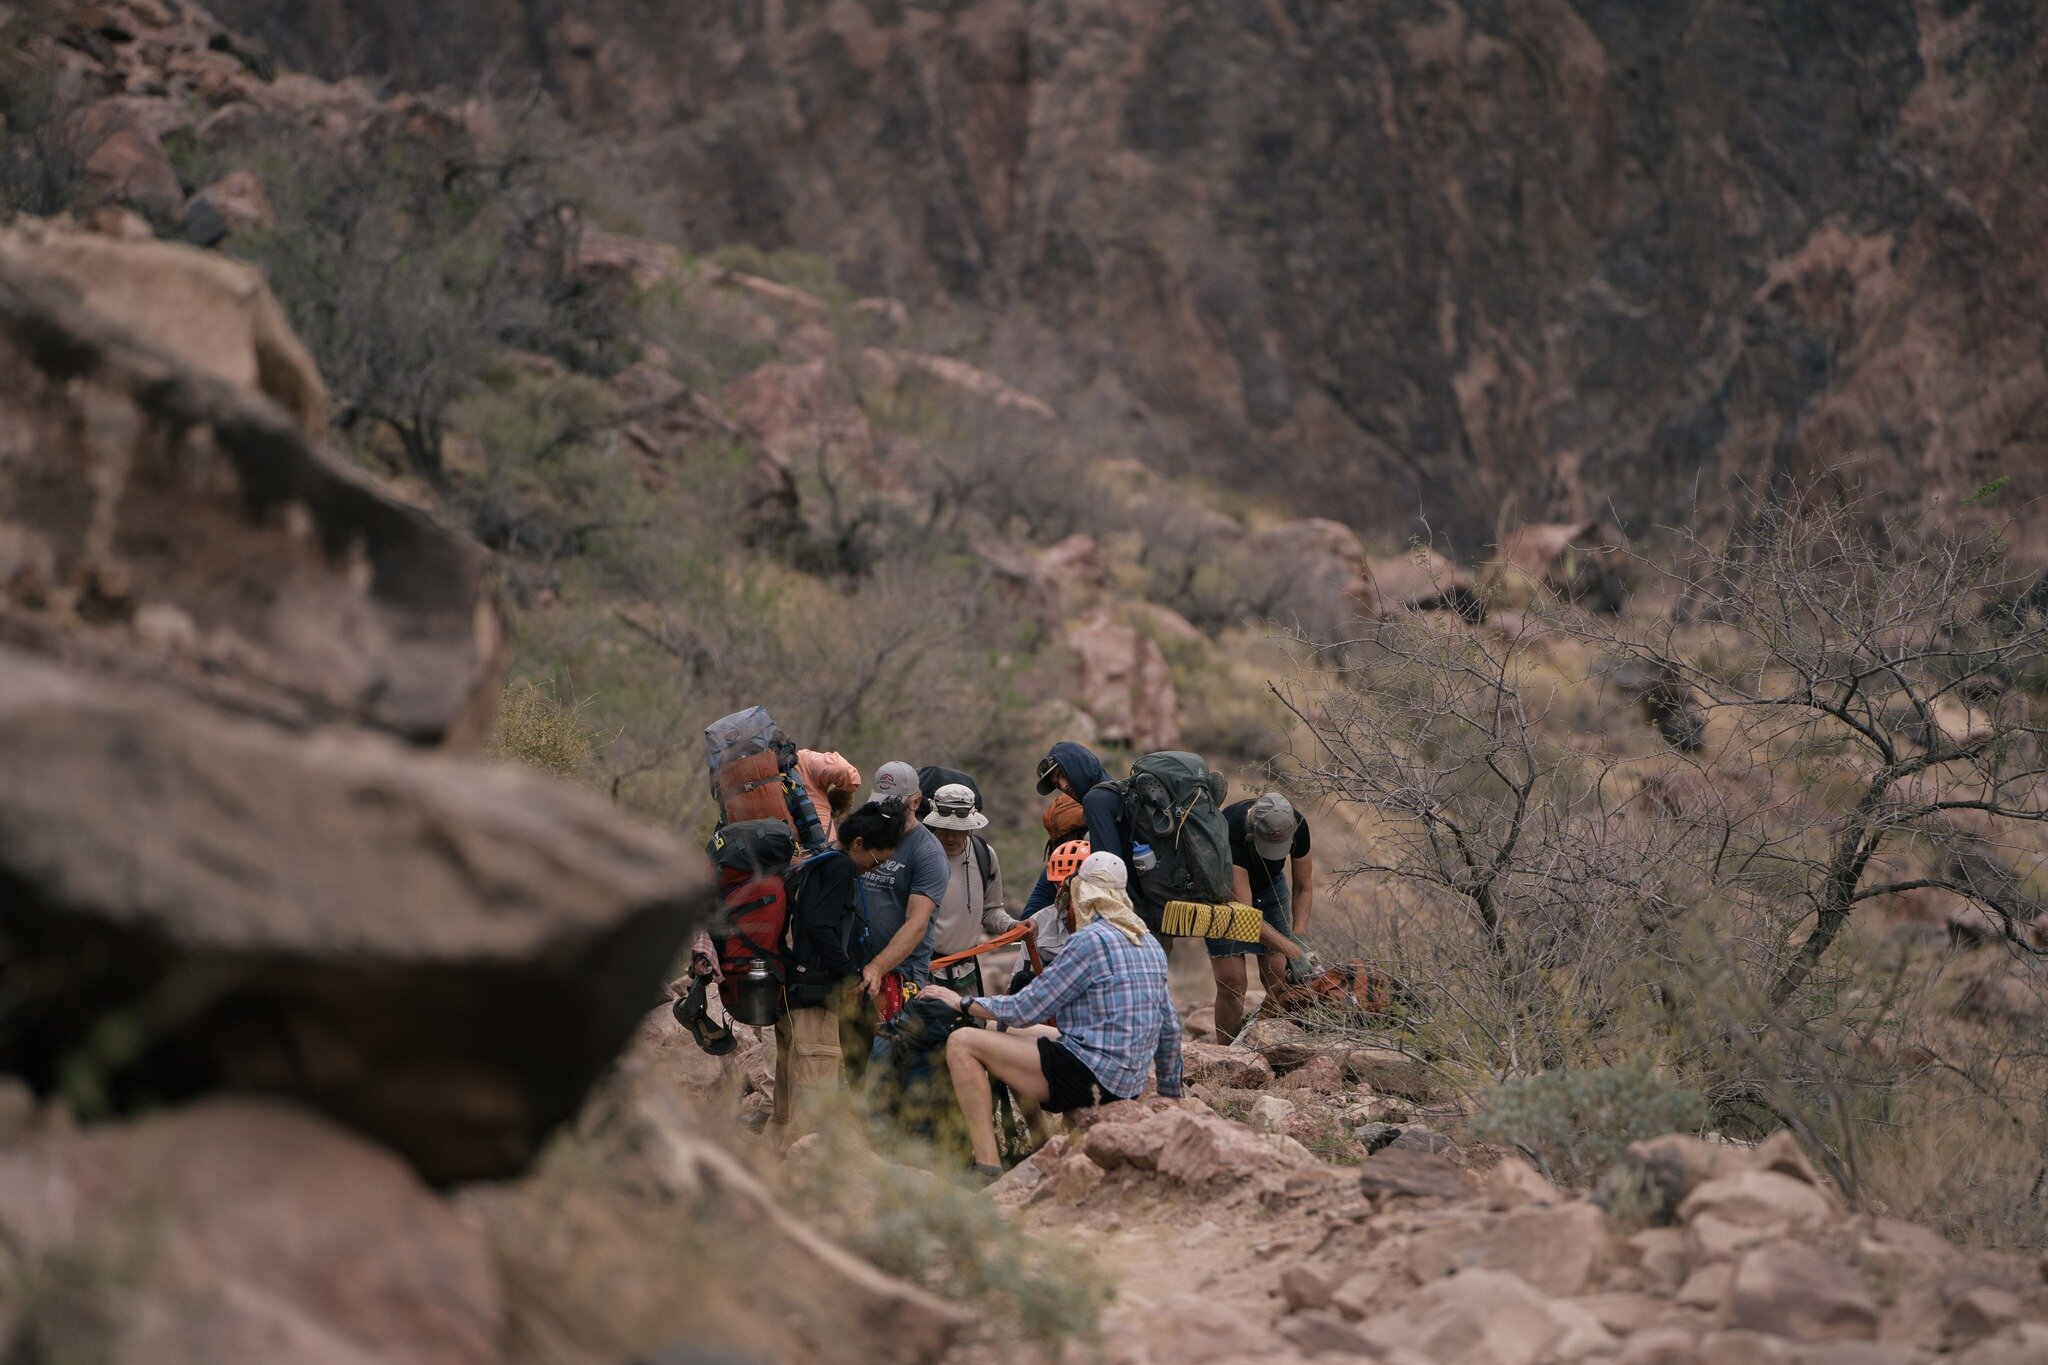 Together, the impossible is possible. Descending into the Grand Canyon was no small feat, achieved by an incredible team full of grit, adventurous spirit, and love (and a LOT of trail mix). 

We're thrilled to show Outback Film's documentary DREAM BO